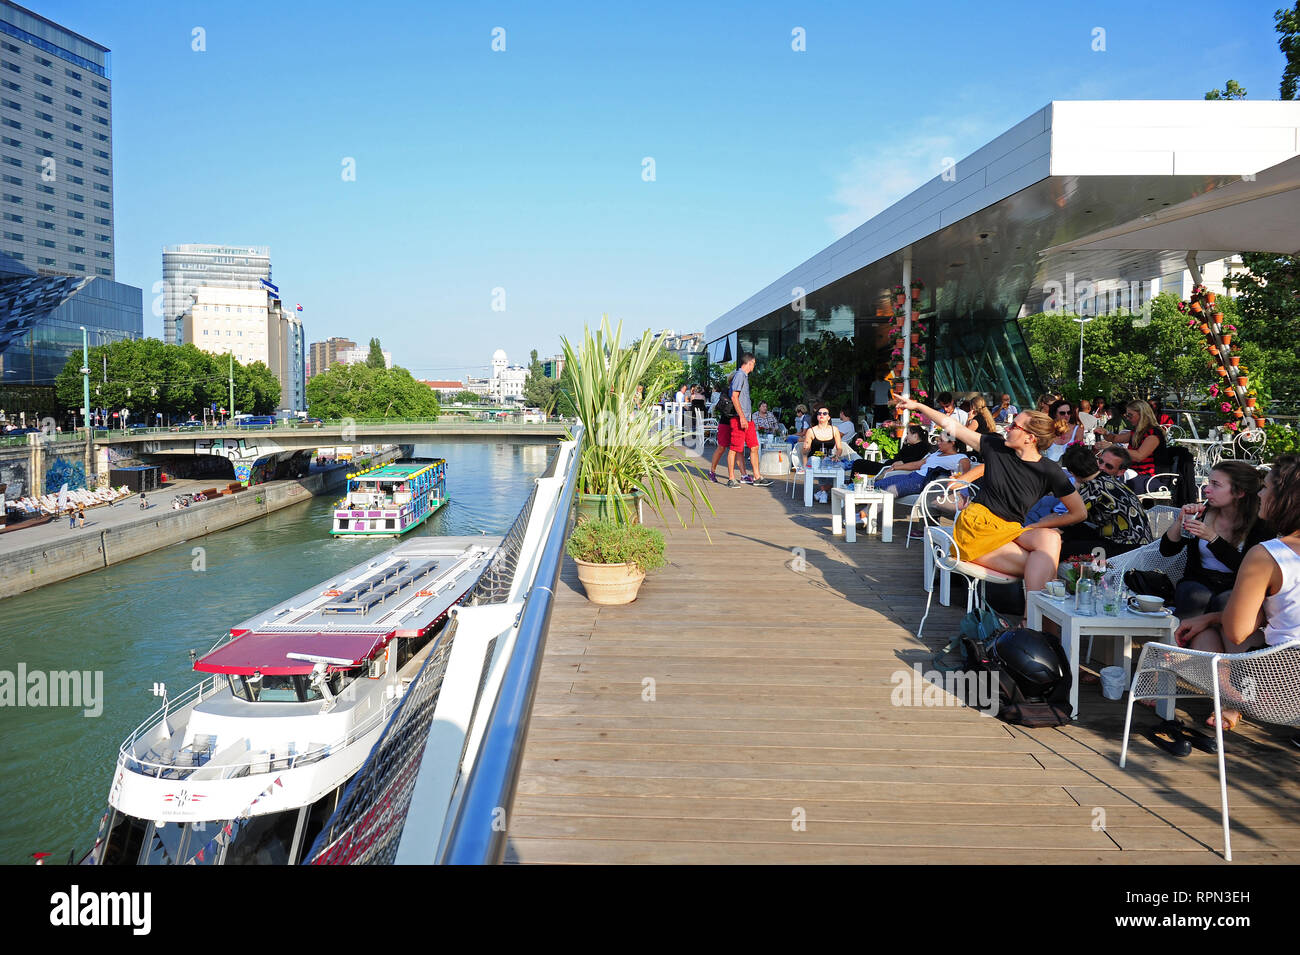 People chilling outdoors in one of the cafes along the Donaukanal , Vienna, Austria Stock Photo